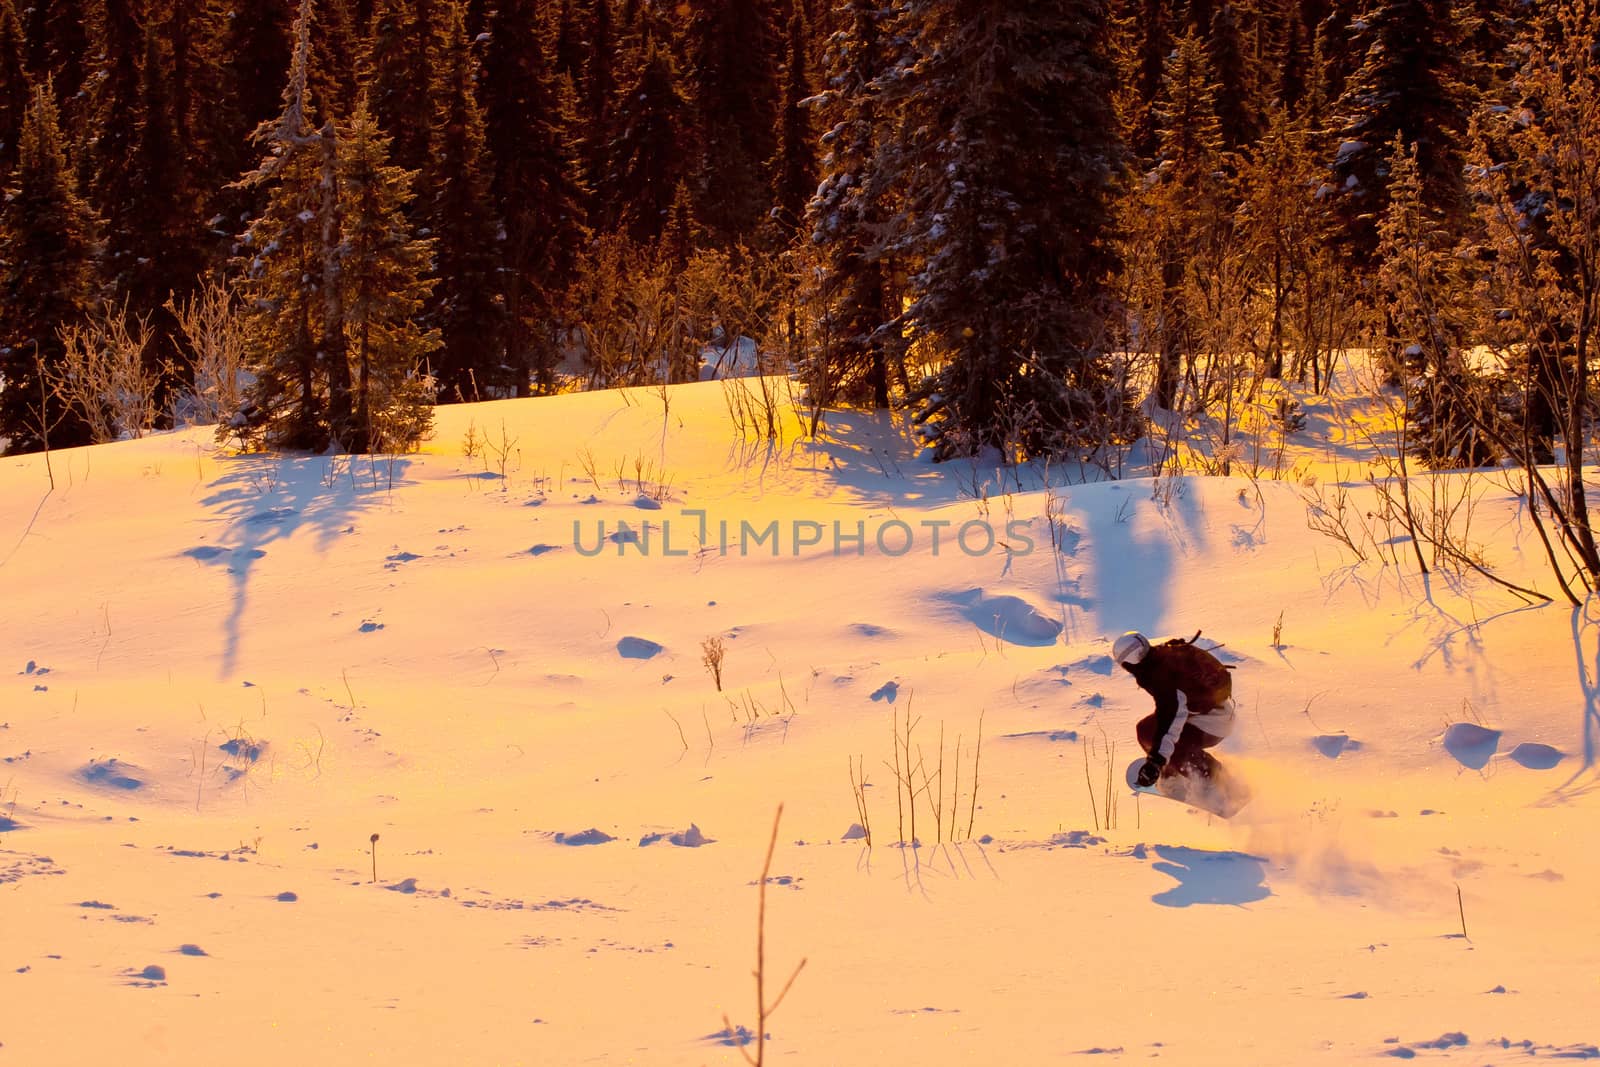 The snowboarder rideing in the forest of Siberia